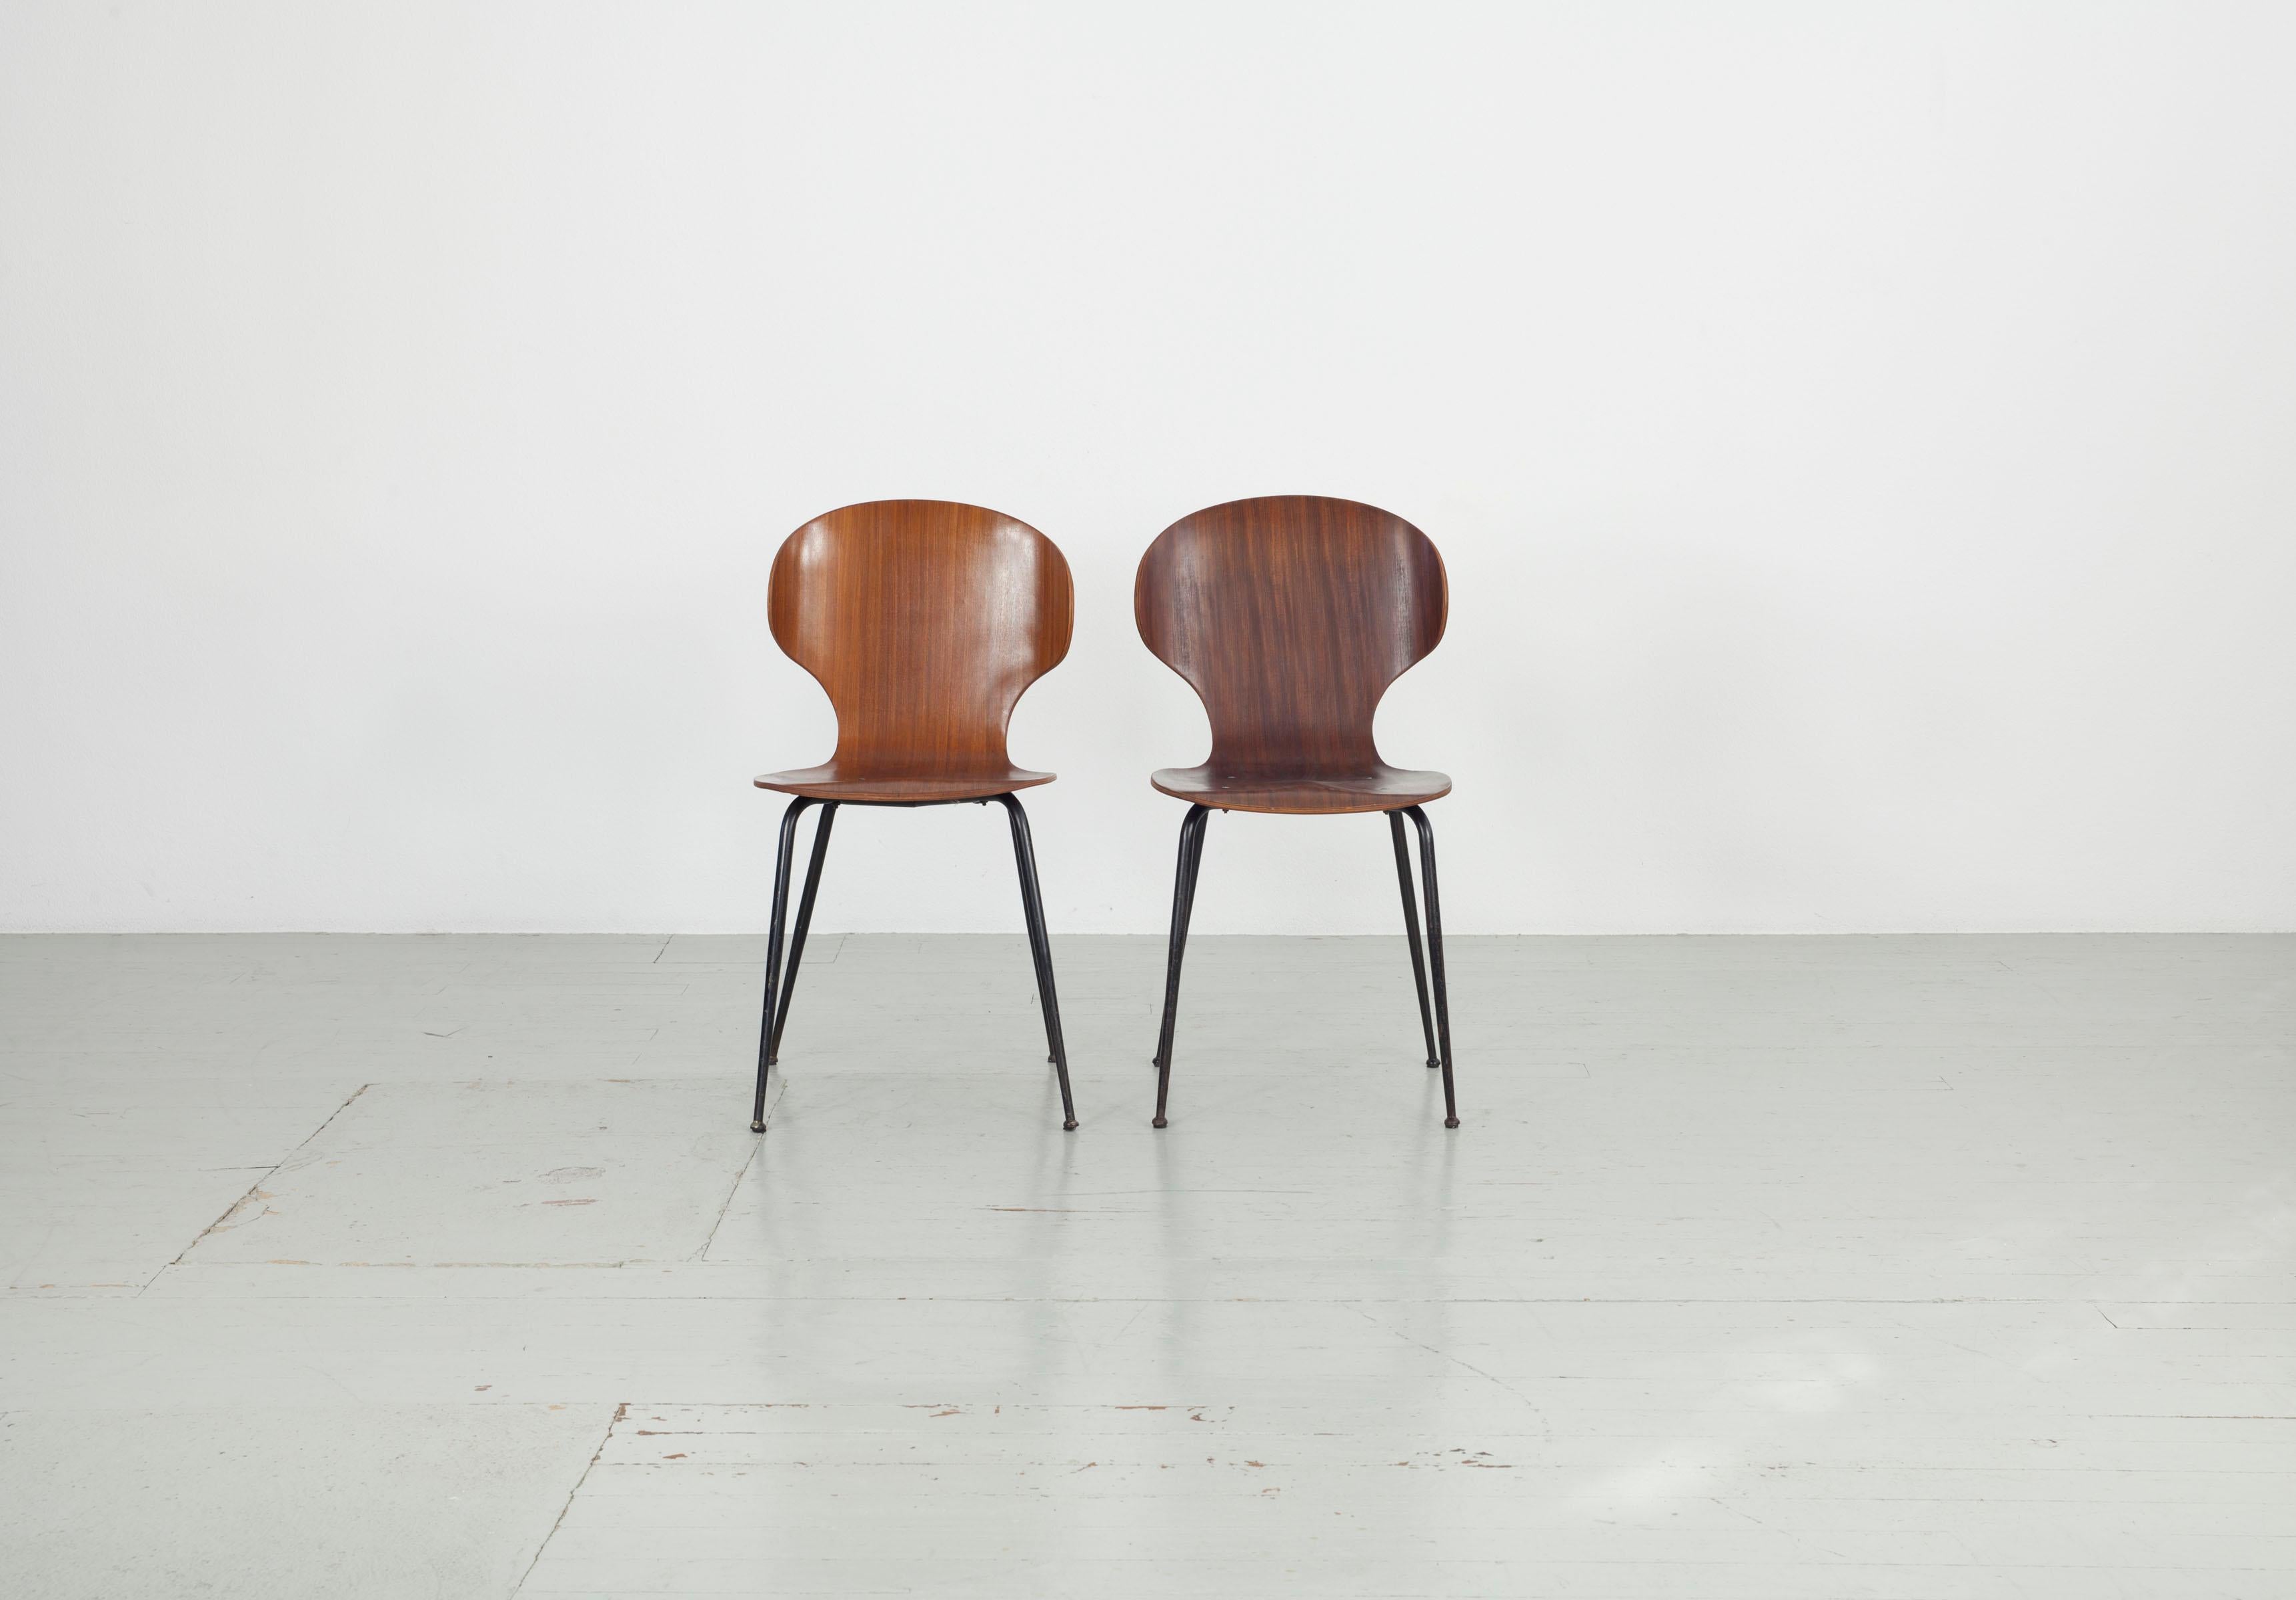 This Italian chair model was designed in the 1950s by Carlo Ratti for Industira Legni Curvati Lissoni and is made of bentwood and black lacquered metal legs. The rounded shapes and thin legs give the chair elegance
You are welcome to contact us for